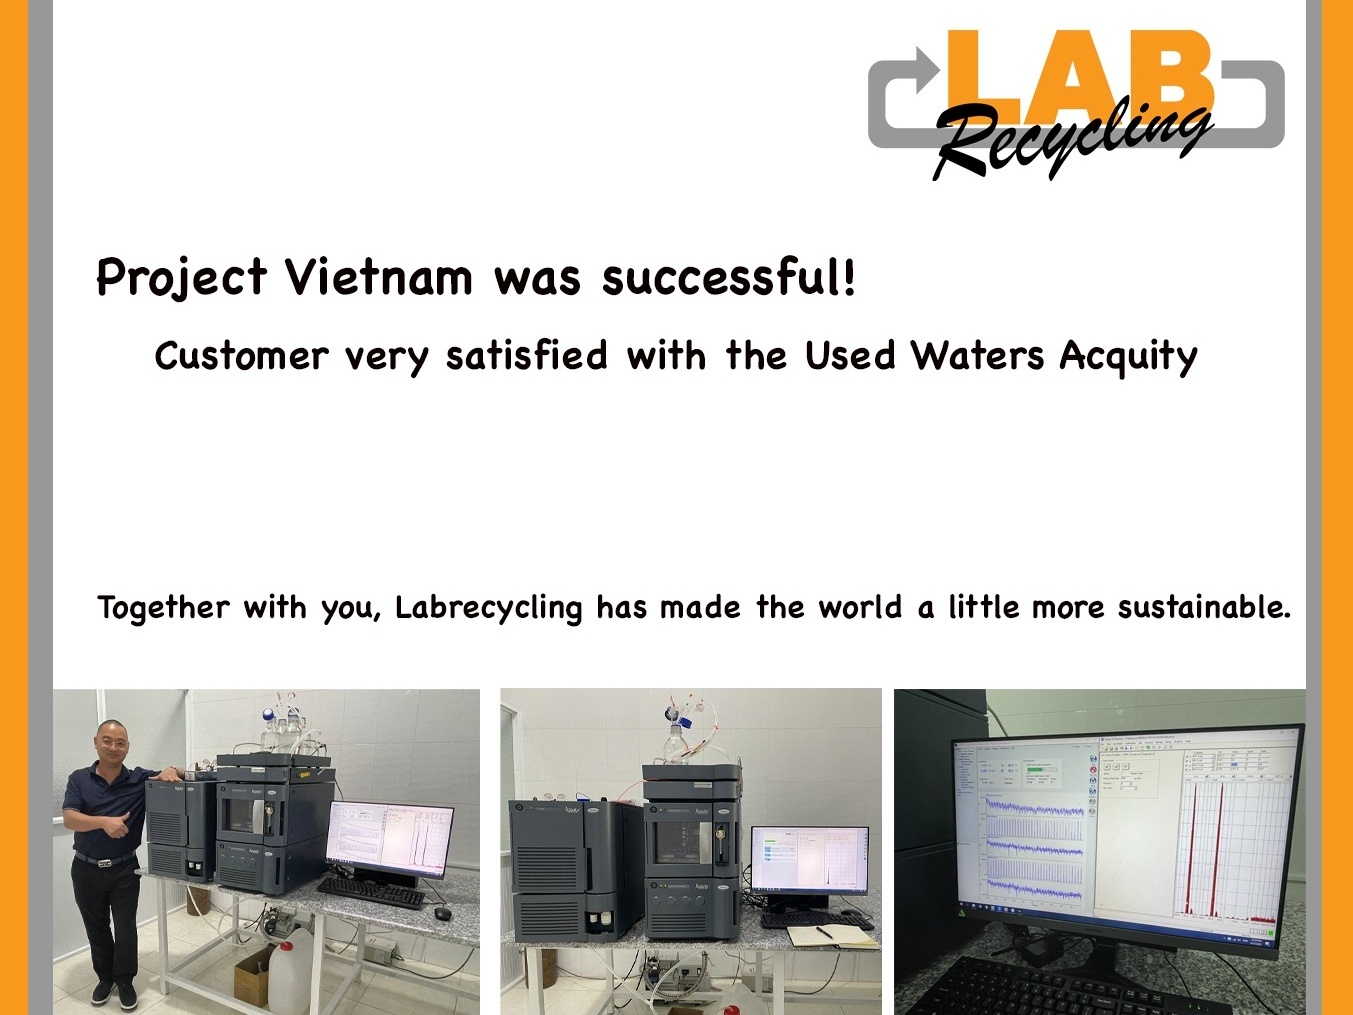 Waters Acquity successfully delivered to our customer in Vietnam